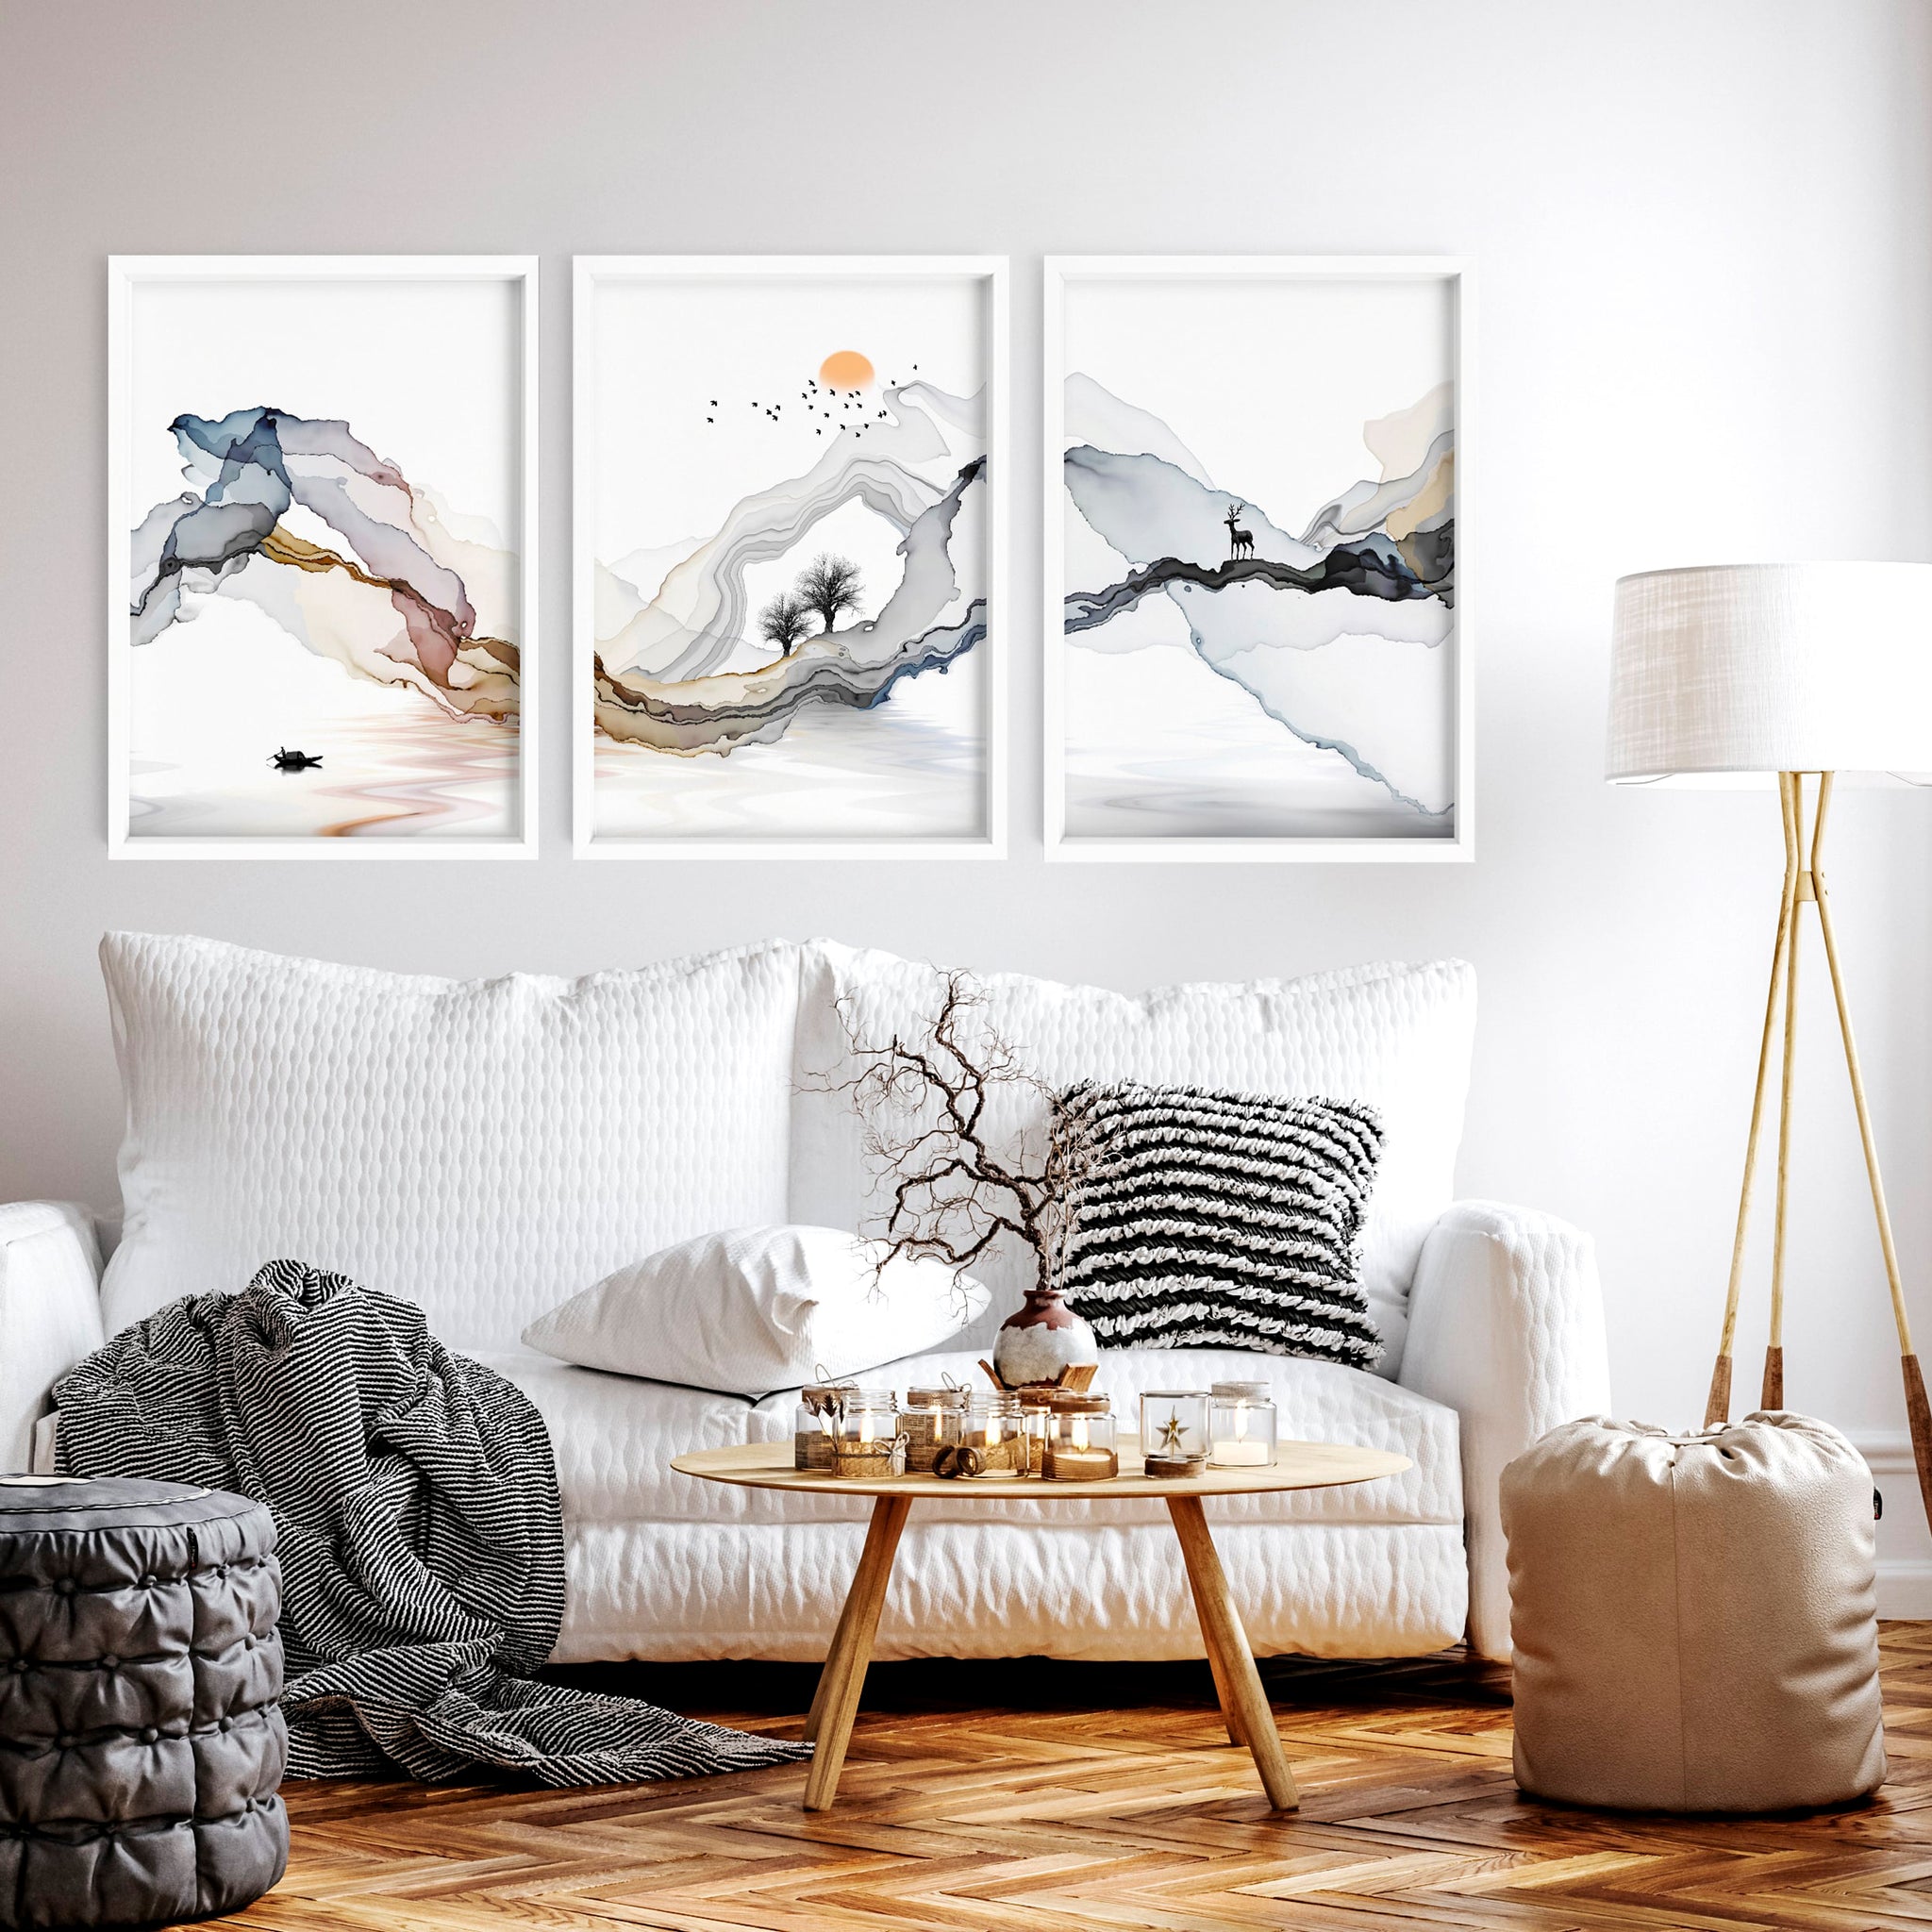 Unique wall art is showcased in a tranquil living room